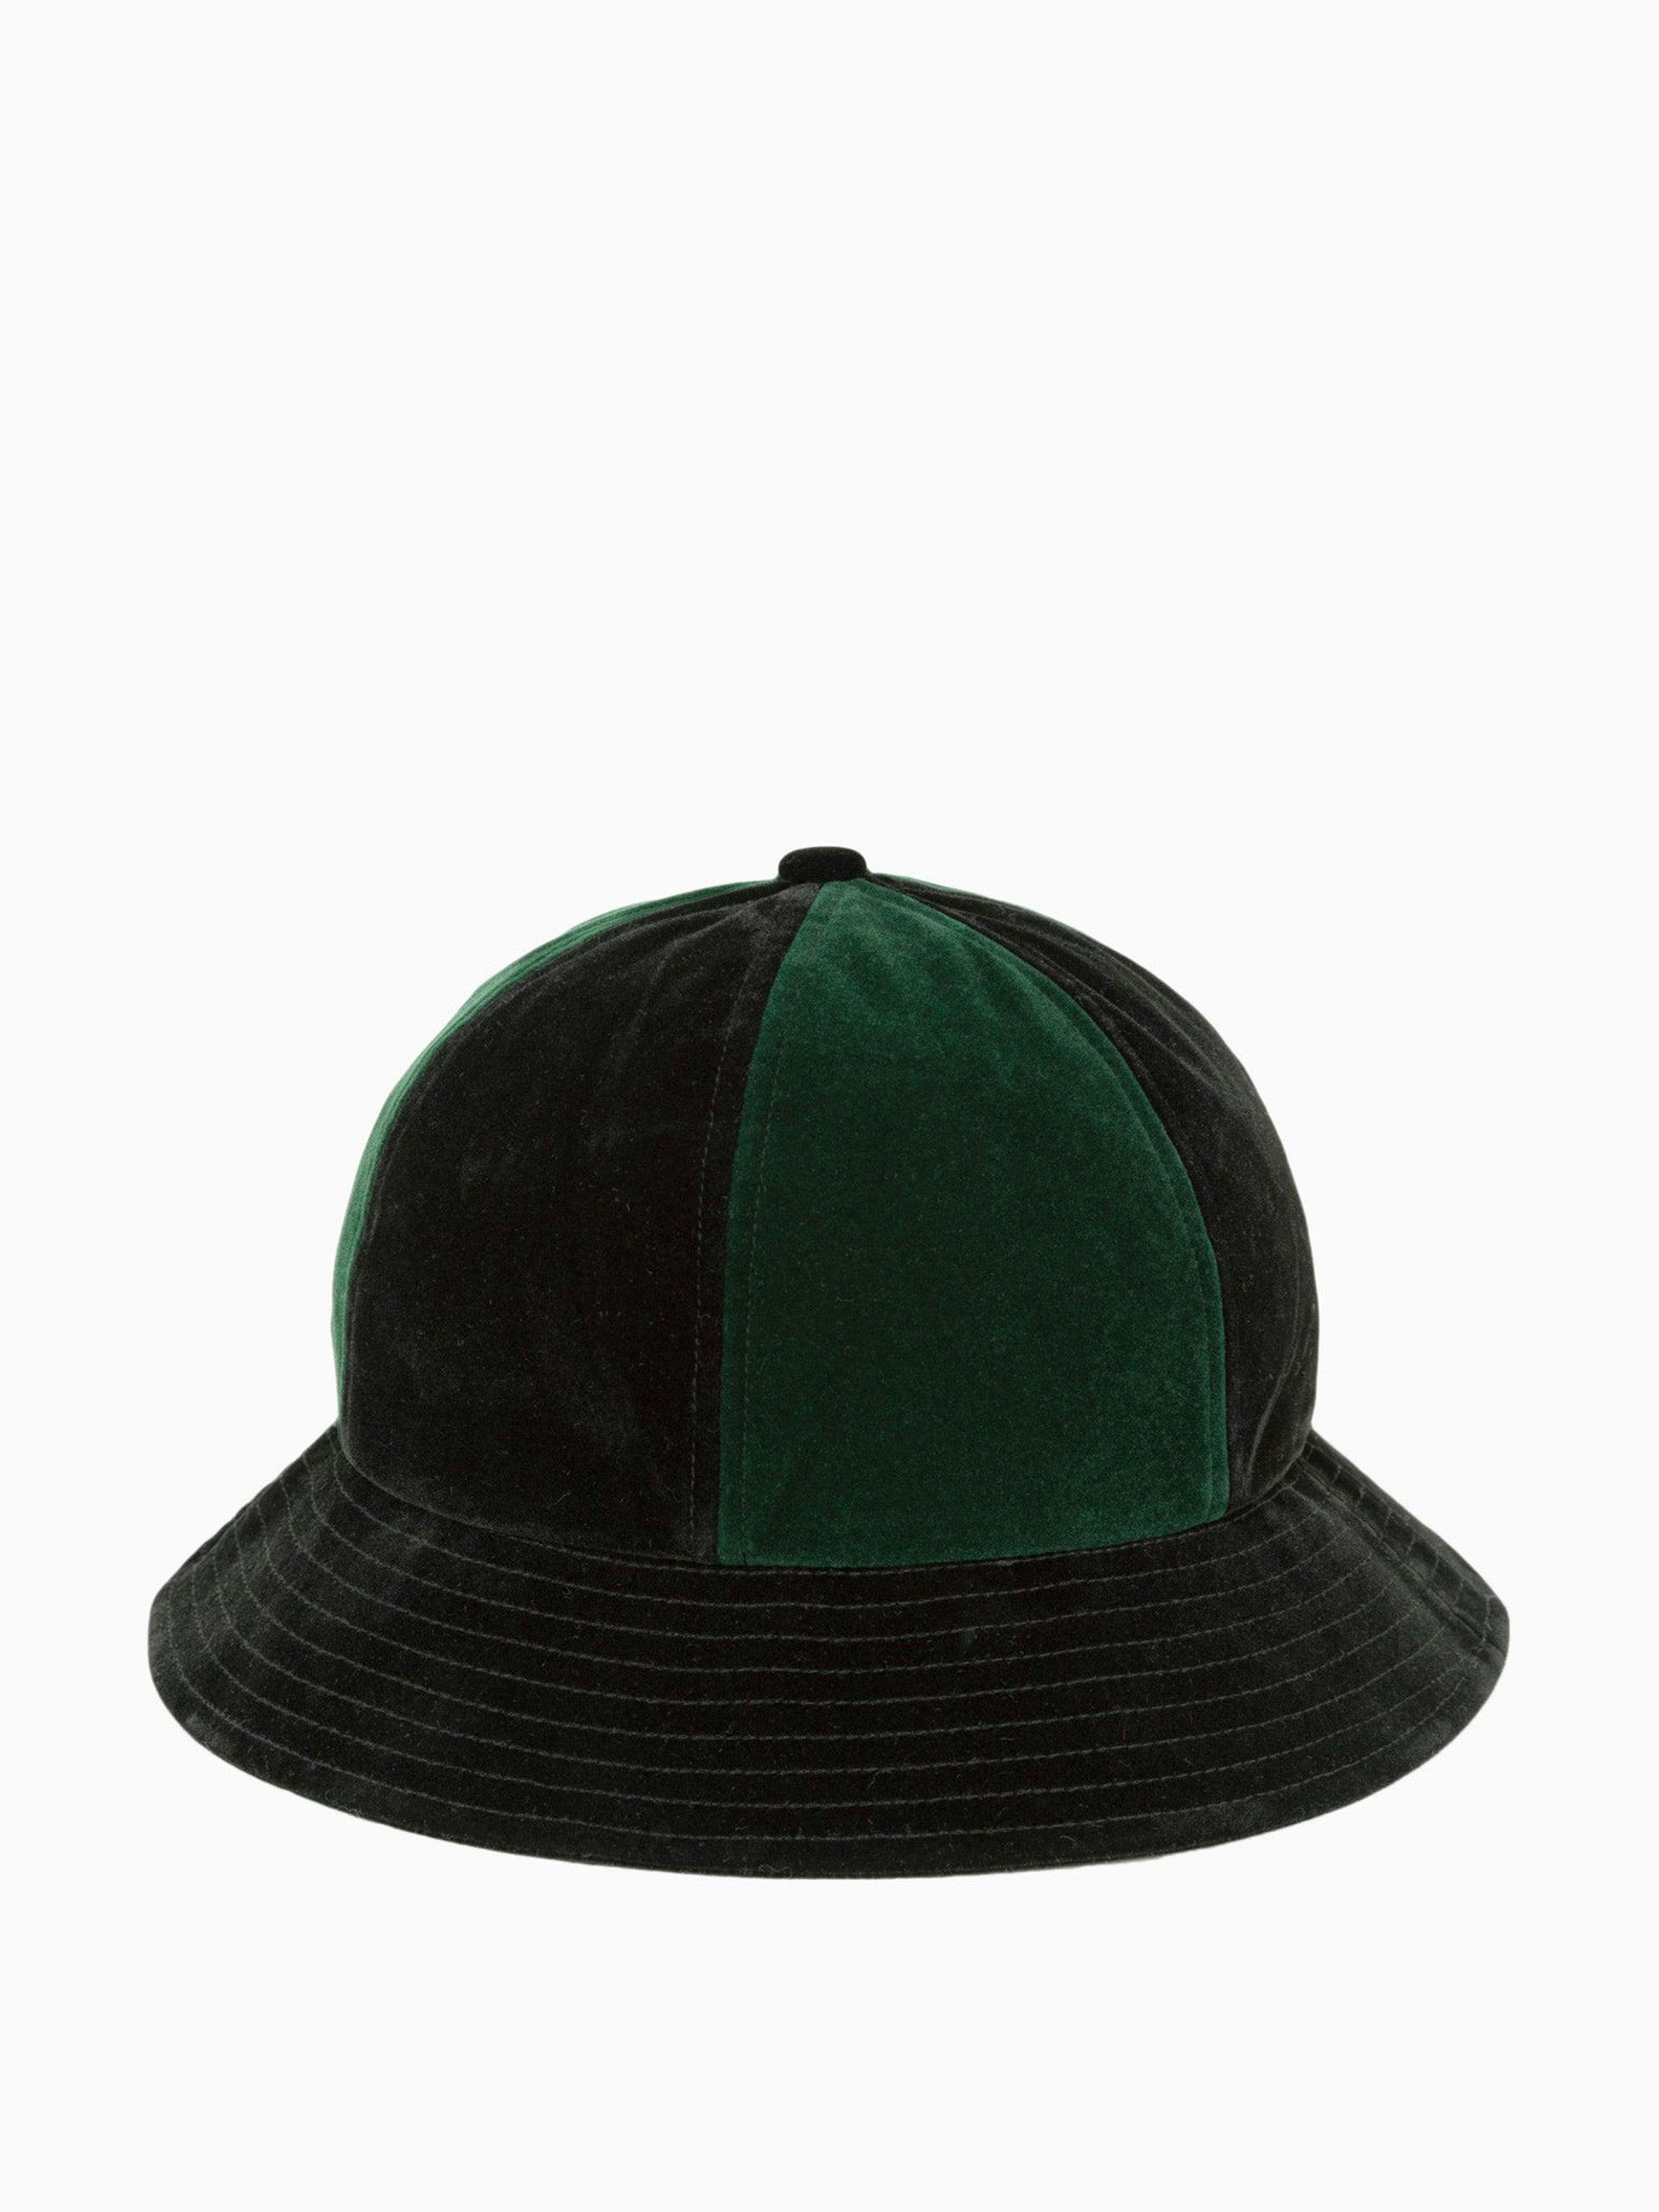 Green and black bucket hat